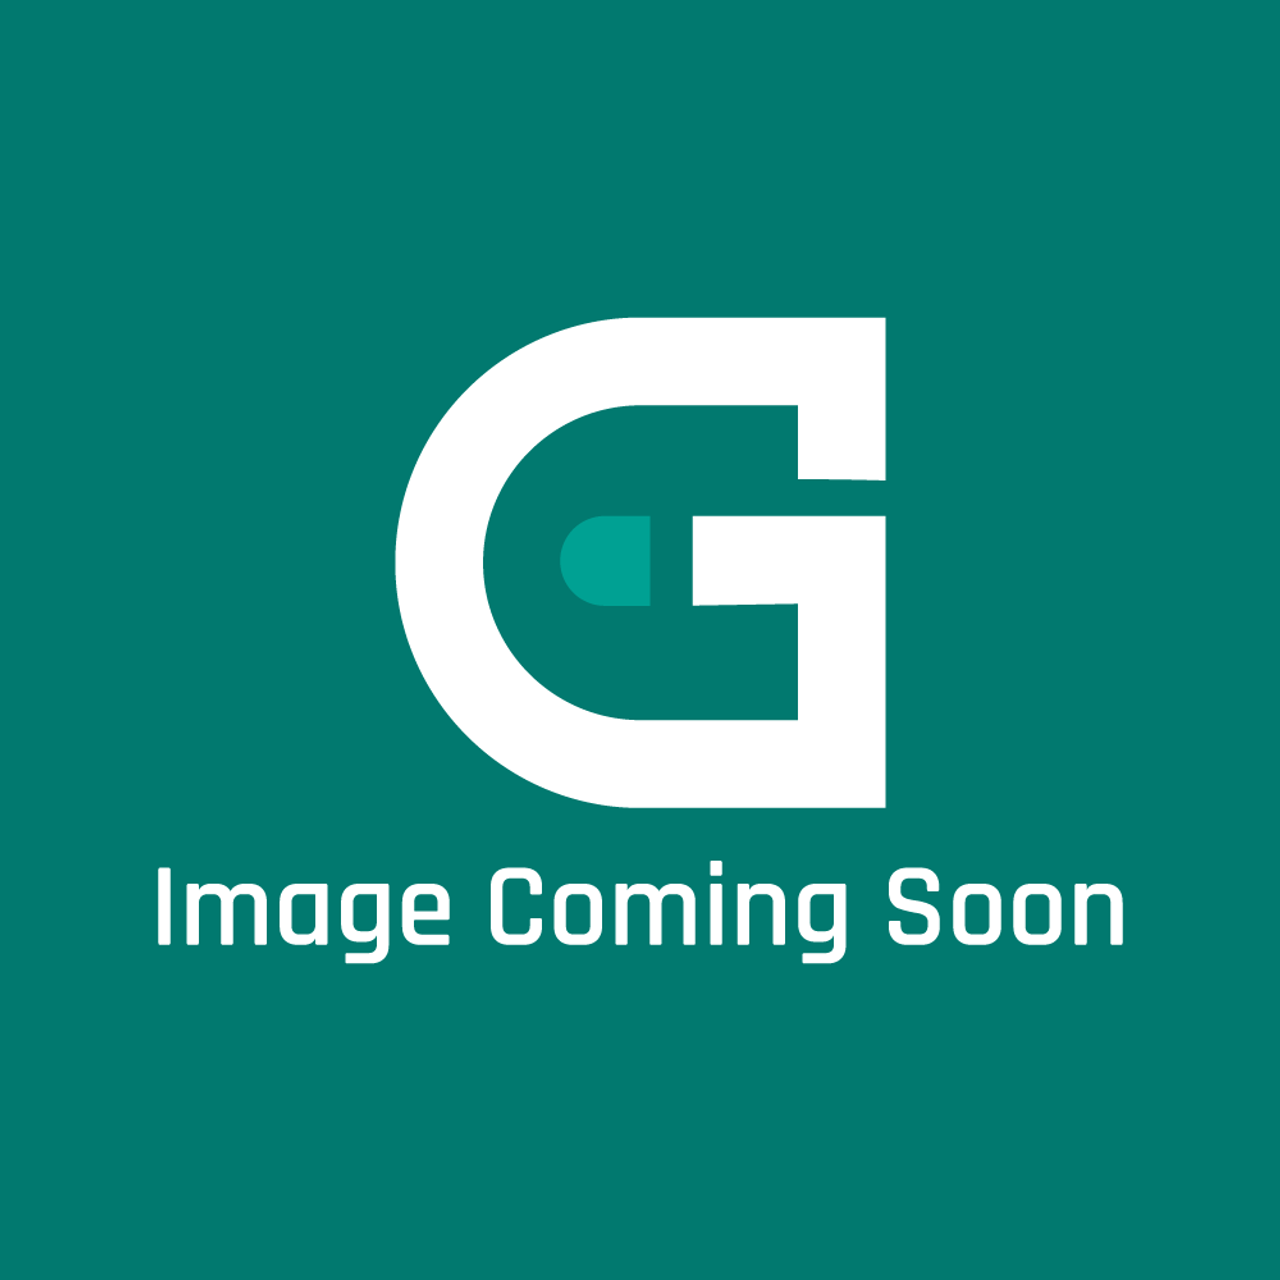 Frigidaire - Electrolux 134640300 - Cover - Image Coming Soon!